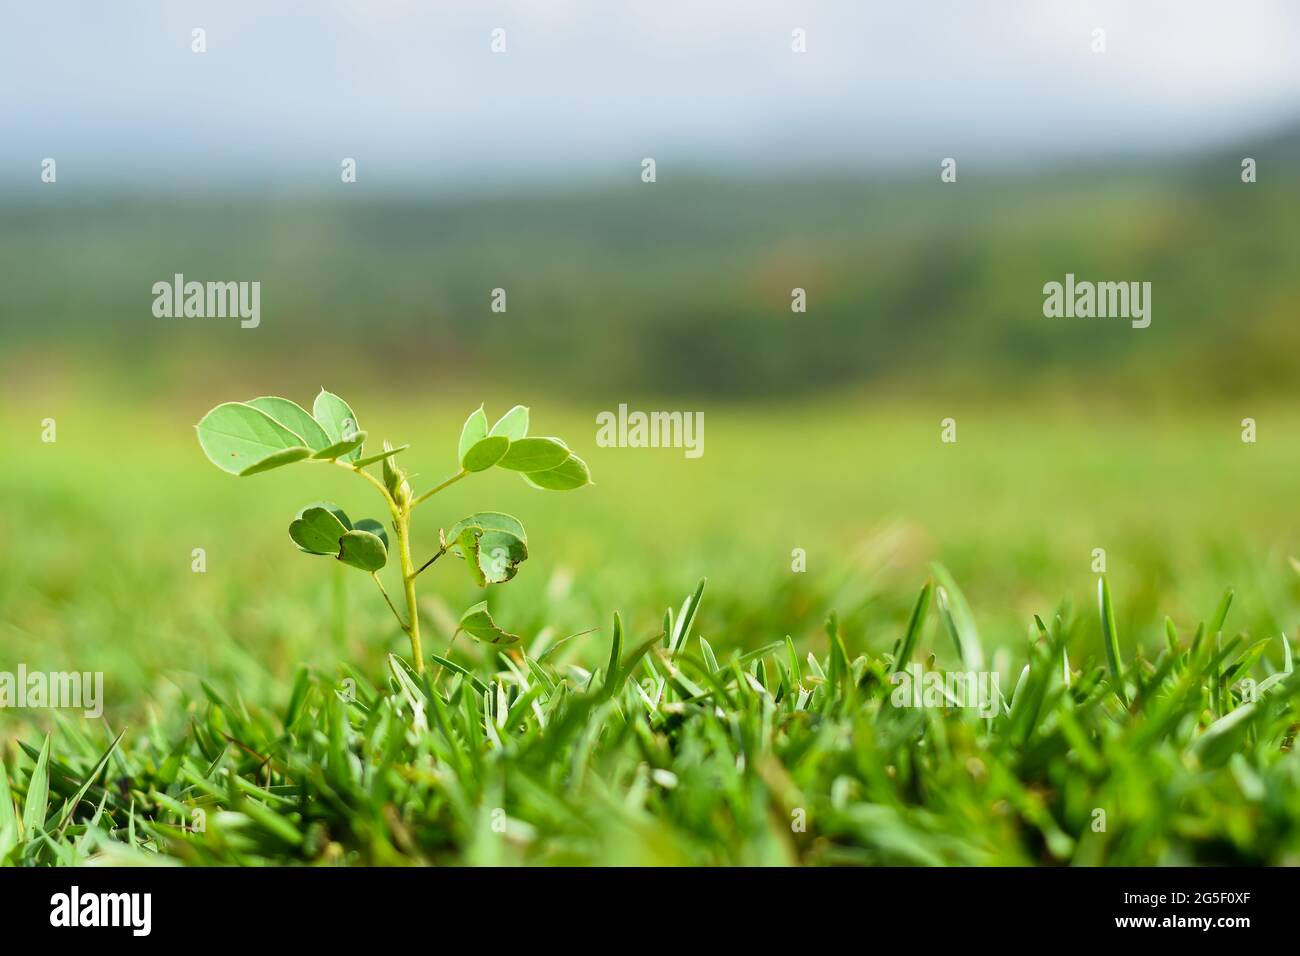 Verdant land covered with grass and one plant growing in grass known as sickel senna during rainy season which is nutritious in diet. Used selective f Stock Photo